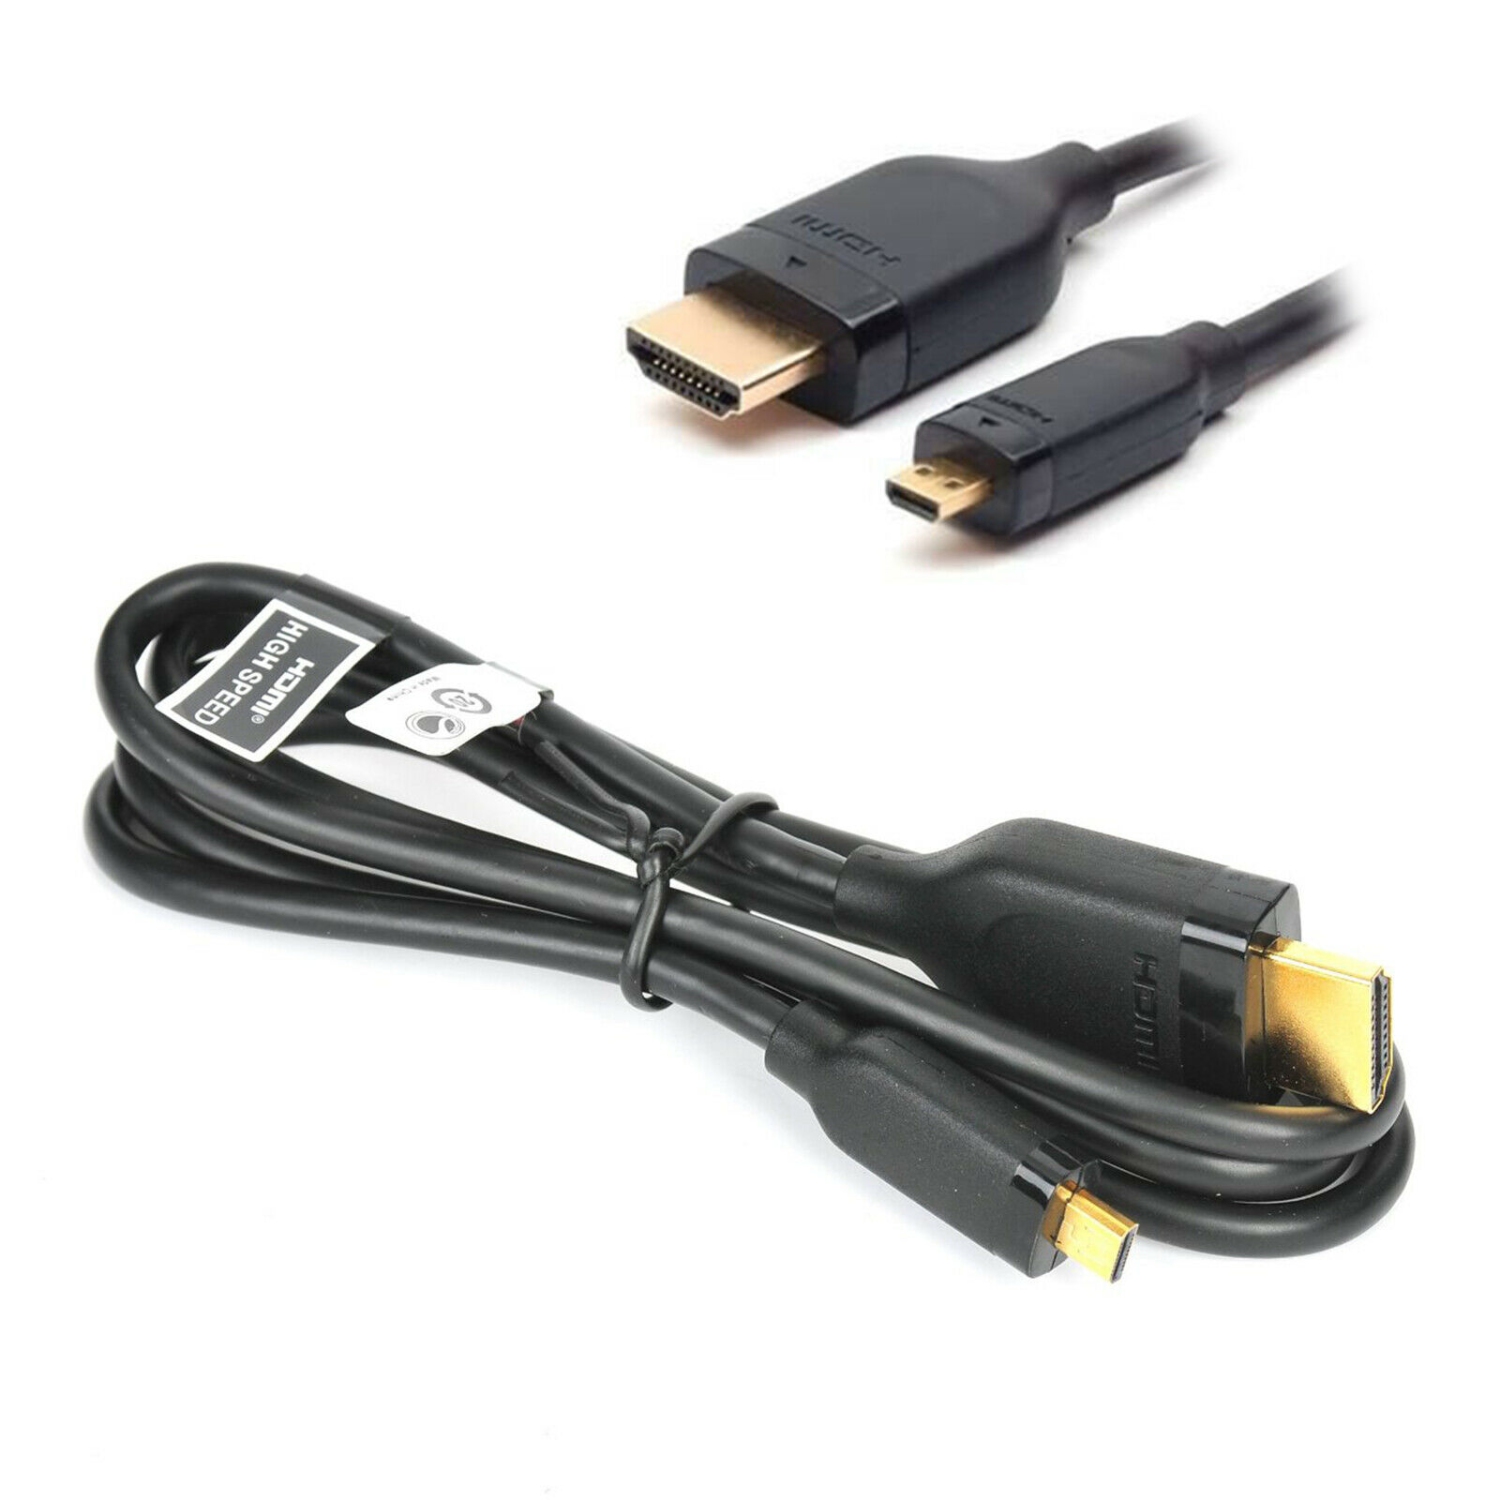 SONY ERICSSON HDMI TV OUT CABLE LEAD FOR XPERIA X12 ARC/S ASPEN NEO/V X10 PRO - BLACK